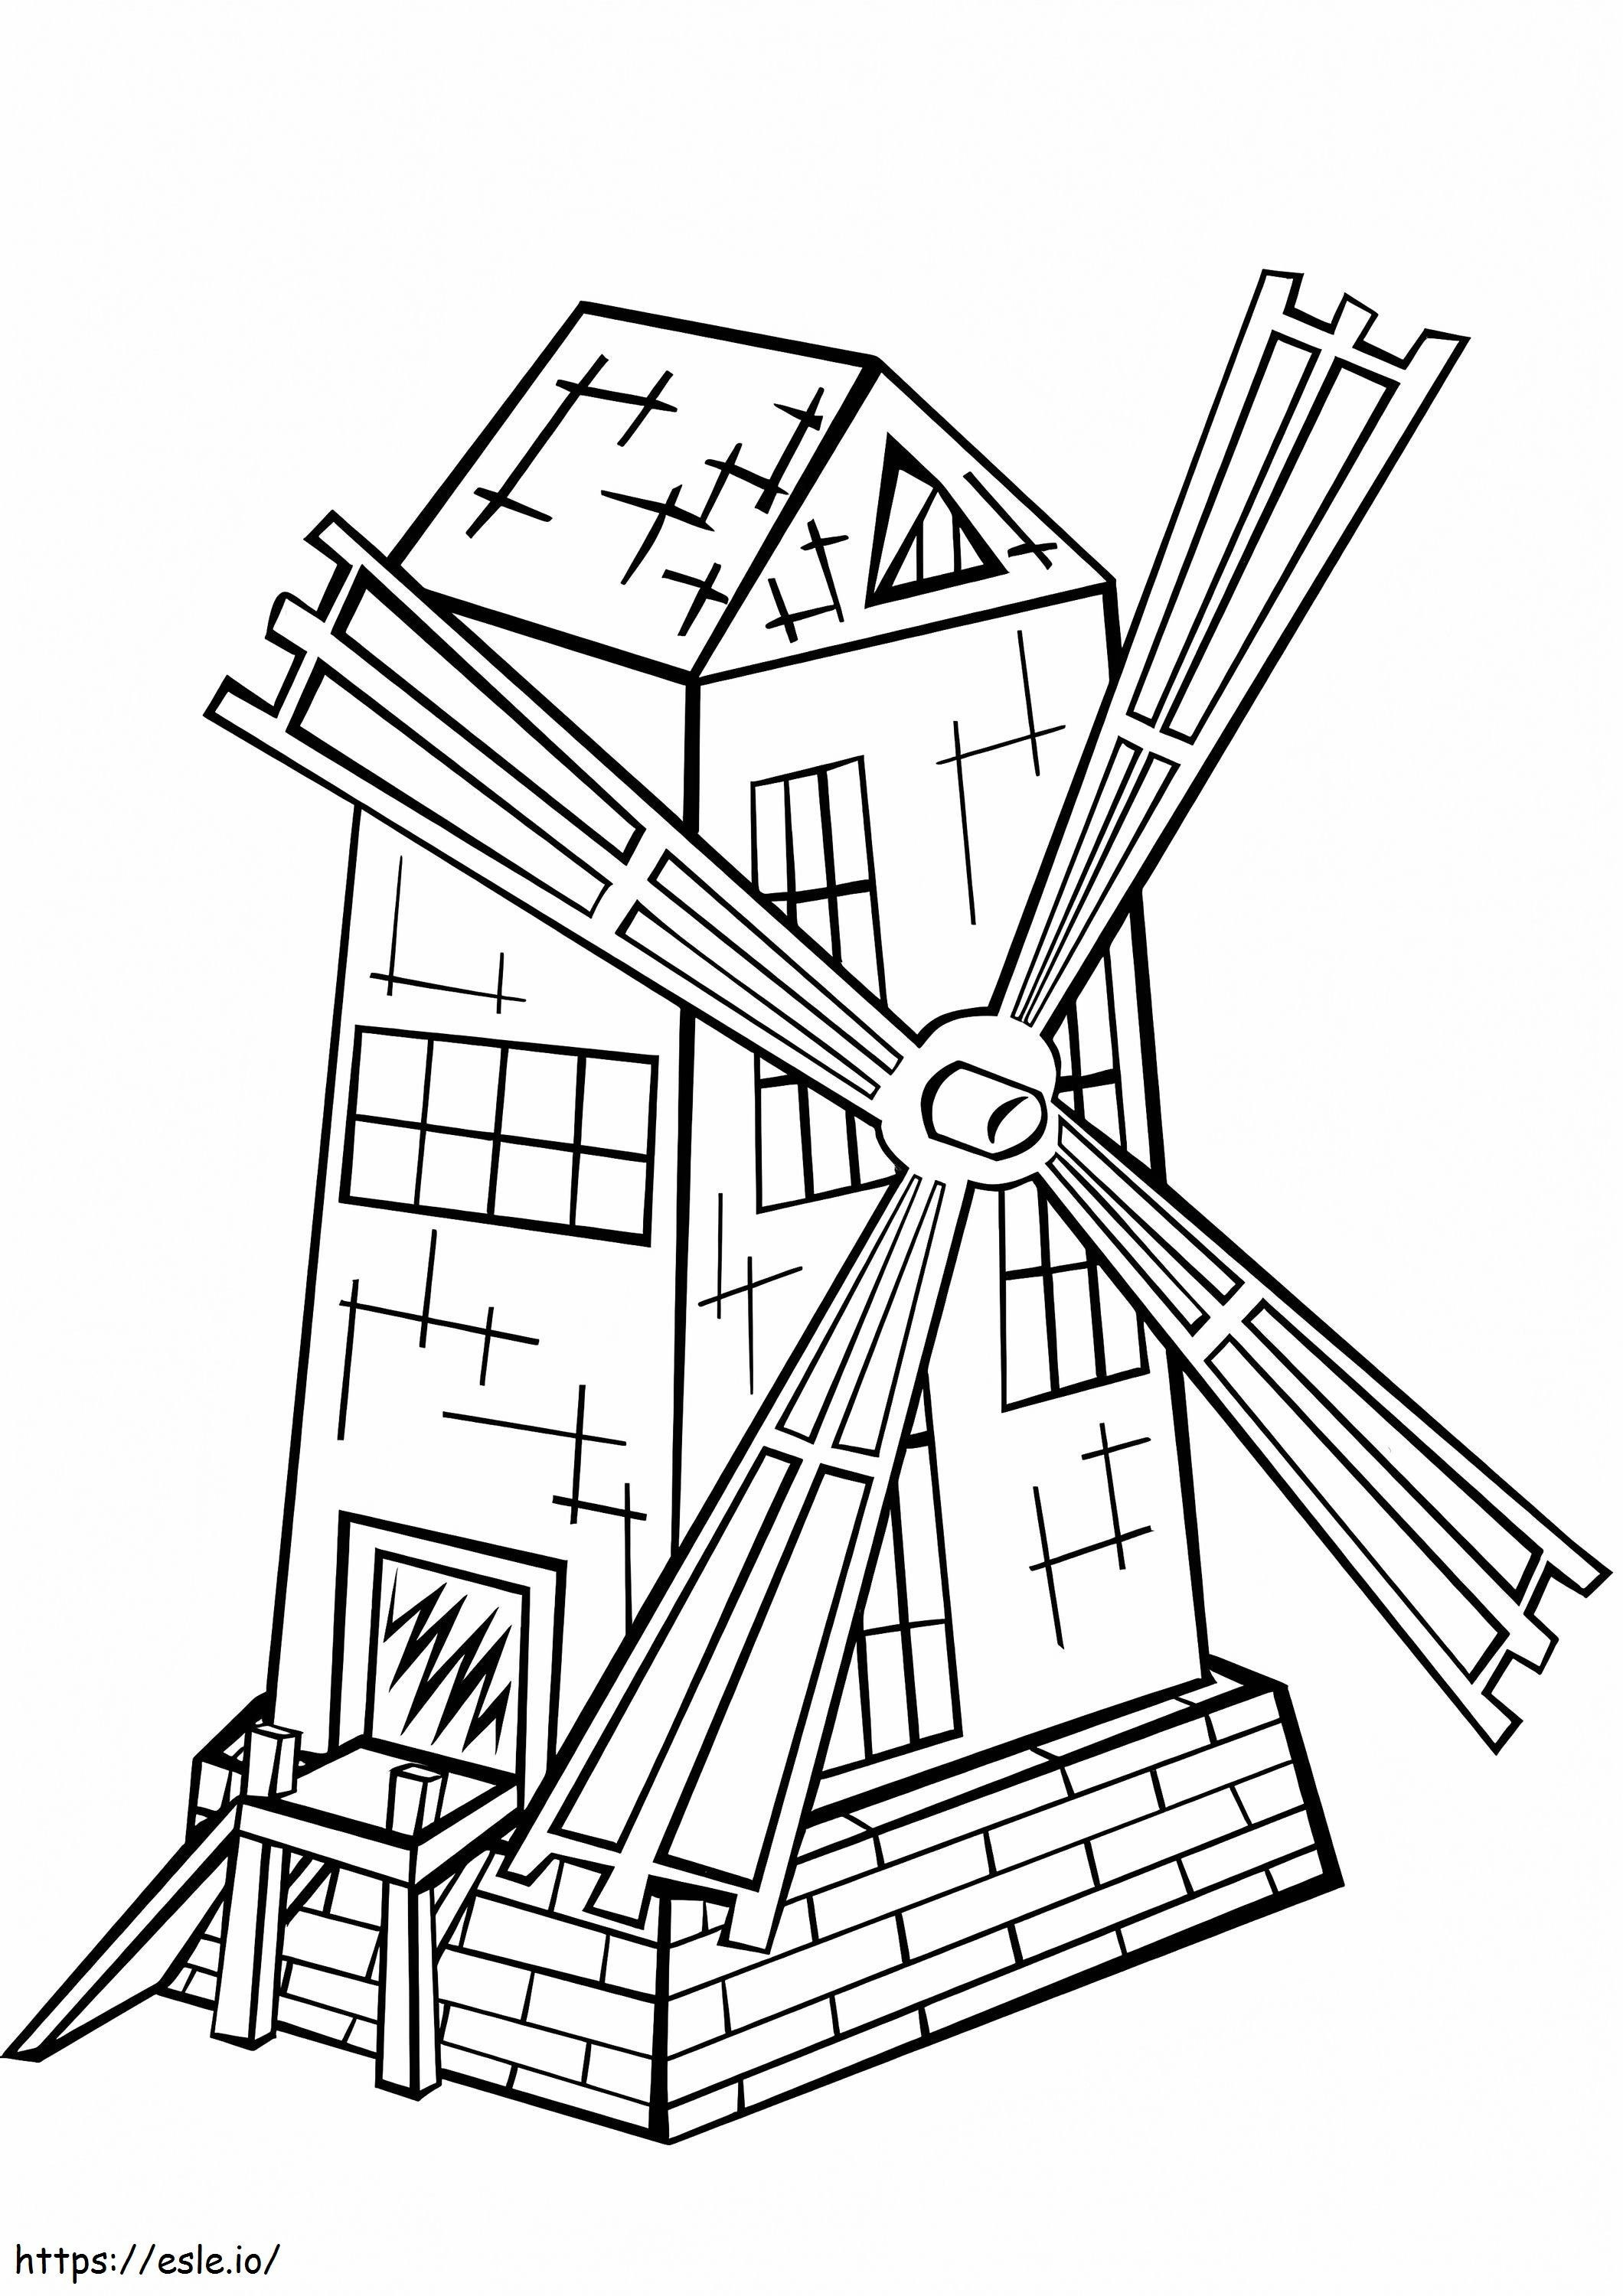 Windmill 3 coloring page